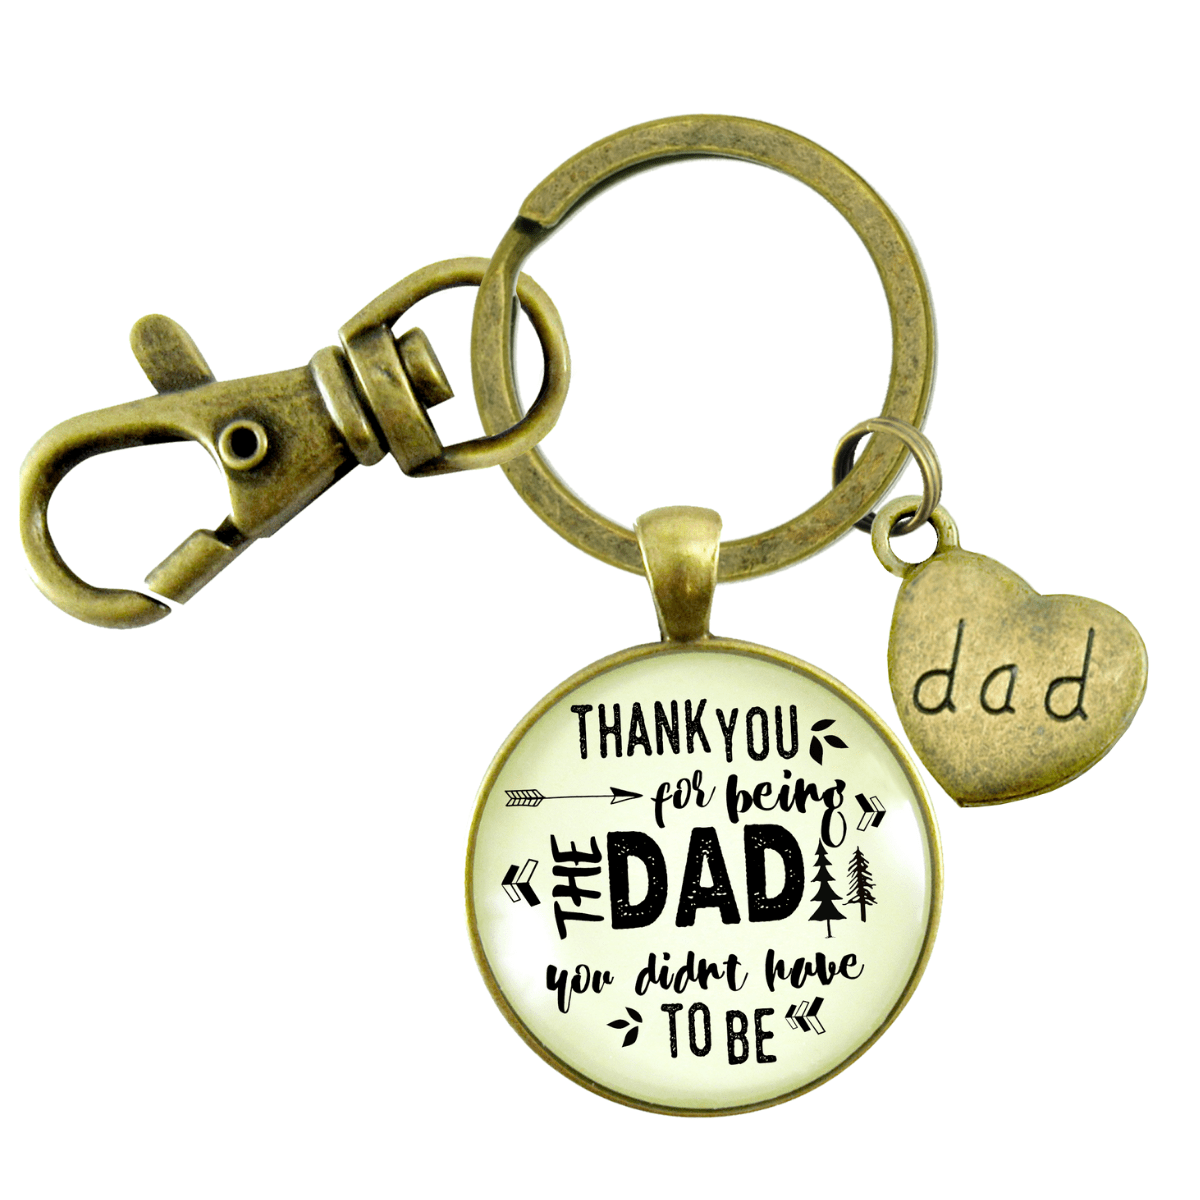 Step Dad Keychain Thank You For Being The Dad Gift Adoptive Father Key Ring - Gutsy Goodness